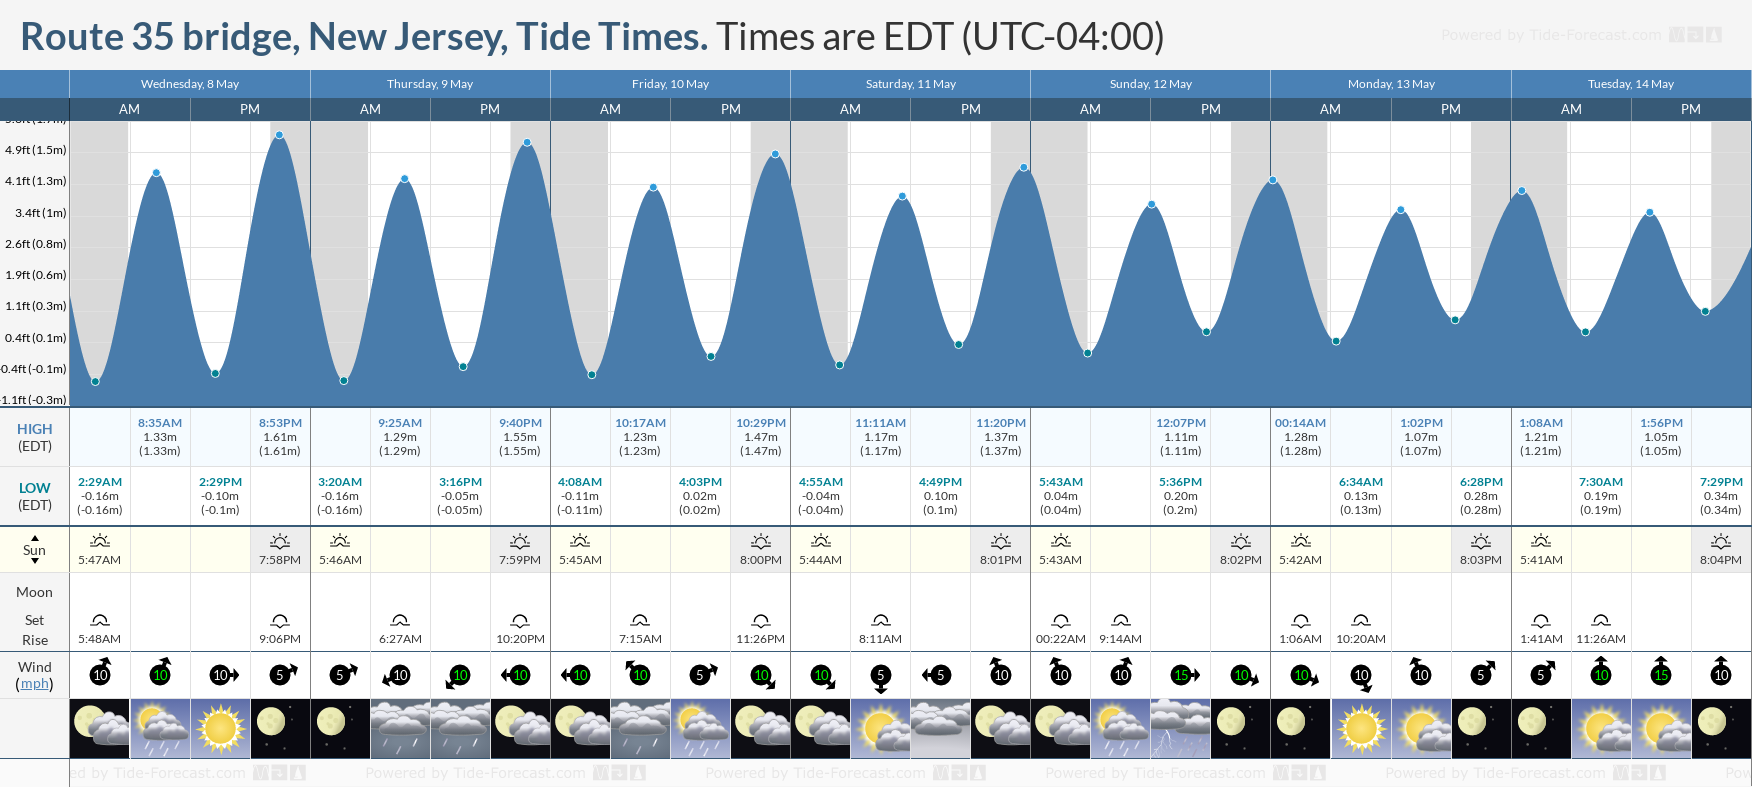 Route 35 bridge, New Jersey Tide Chart including high and low tide times for the next 7 days